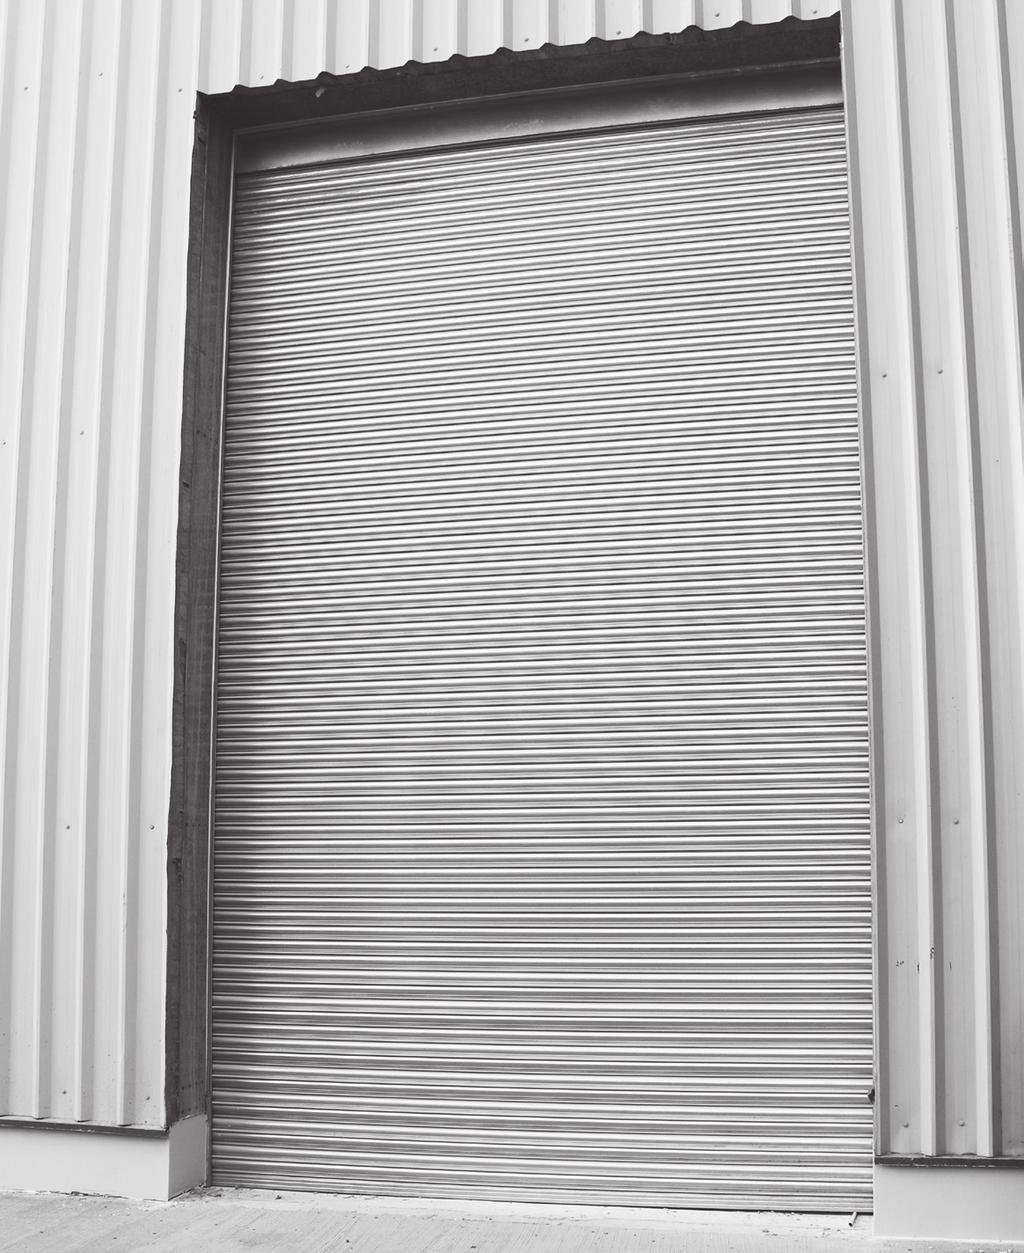 Steel Shutter, E120-120 minutes TECHNICAL SPECIFICATIONS: DIMENSIONS Max. W 6 m x H 6 m.